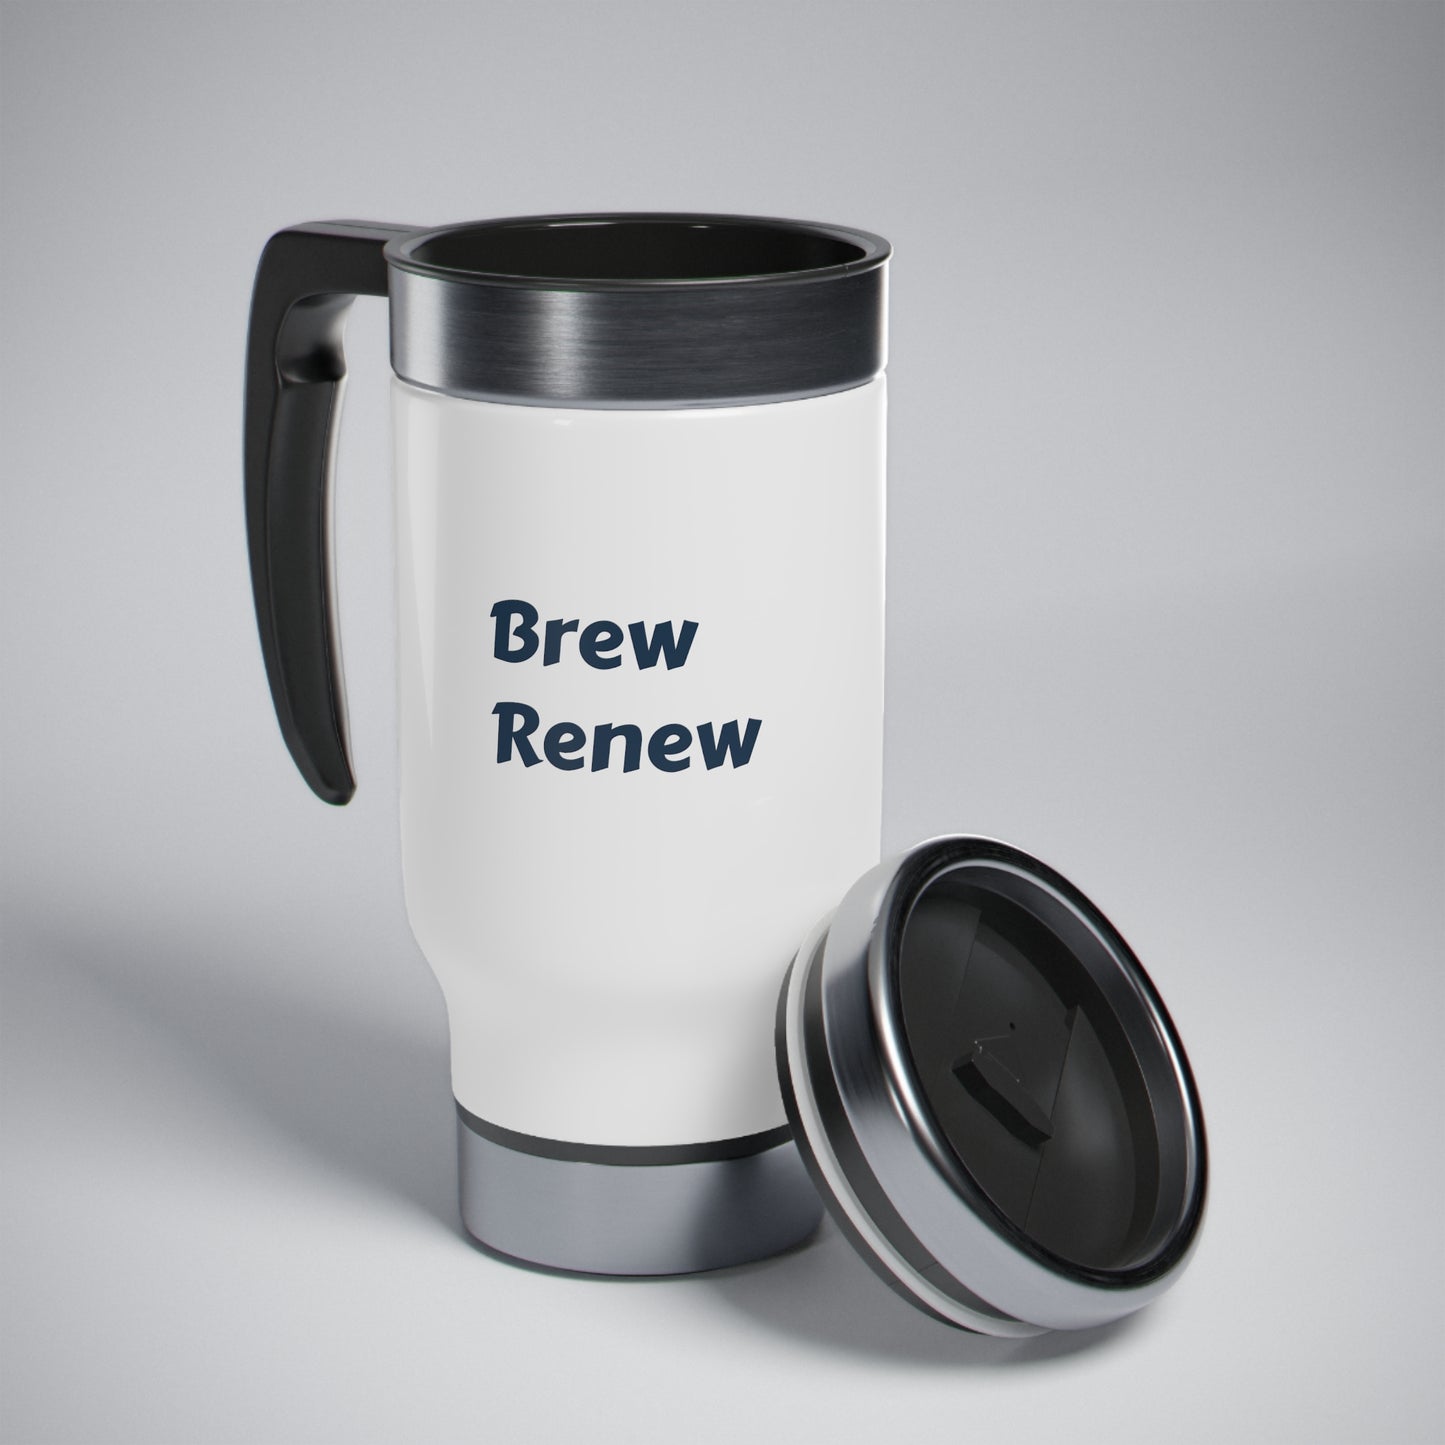 Brew-Renew Stainless Steel Travel Mug with Handle, 14oz